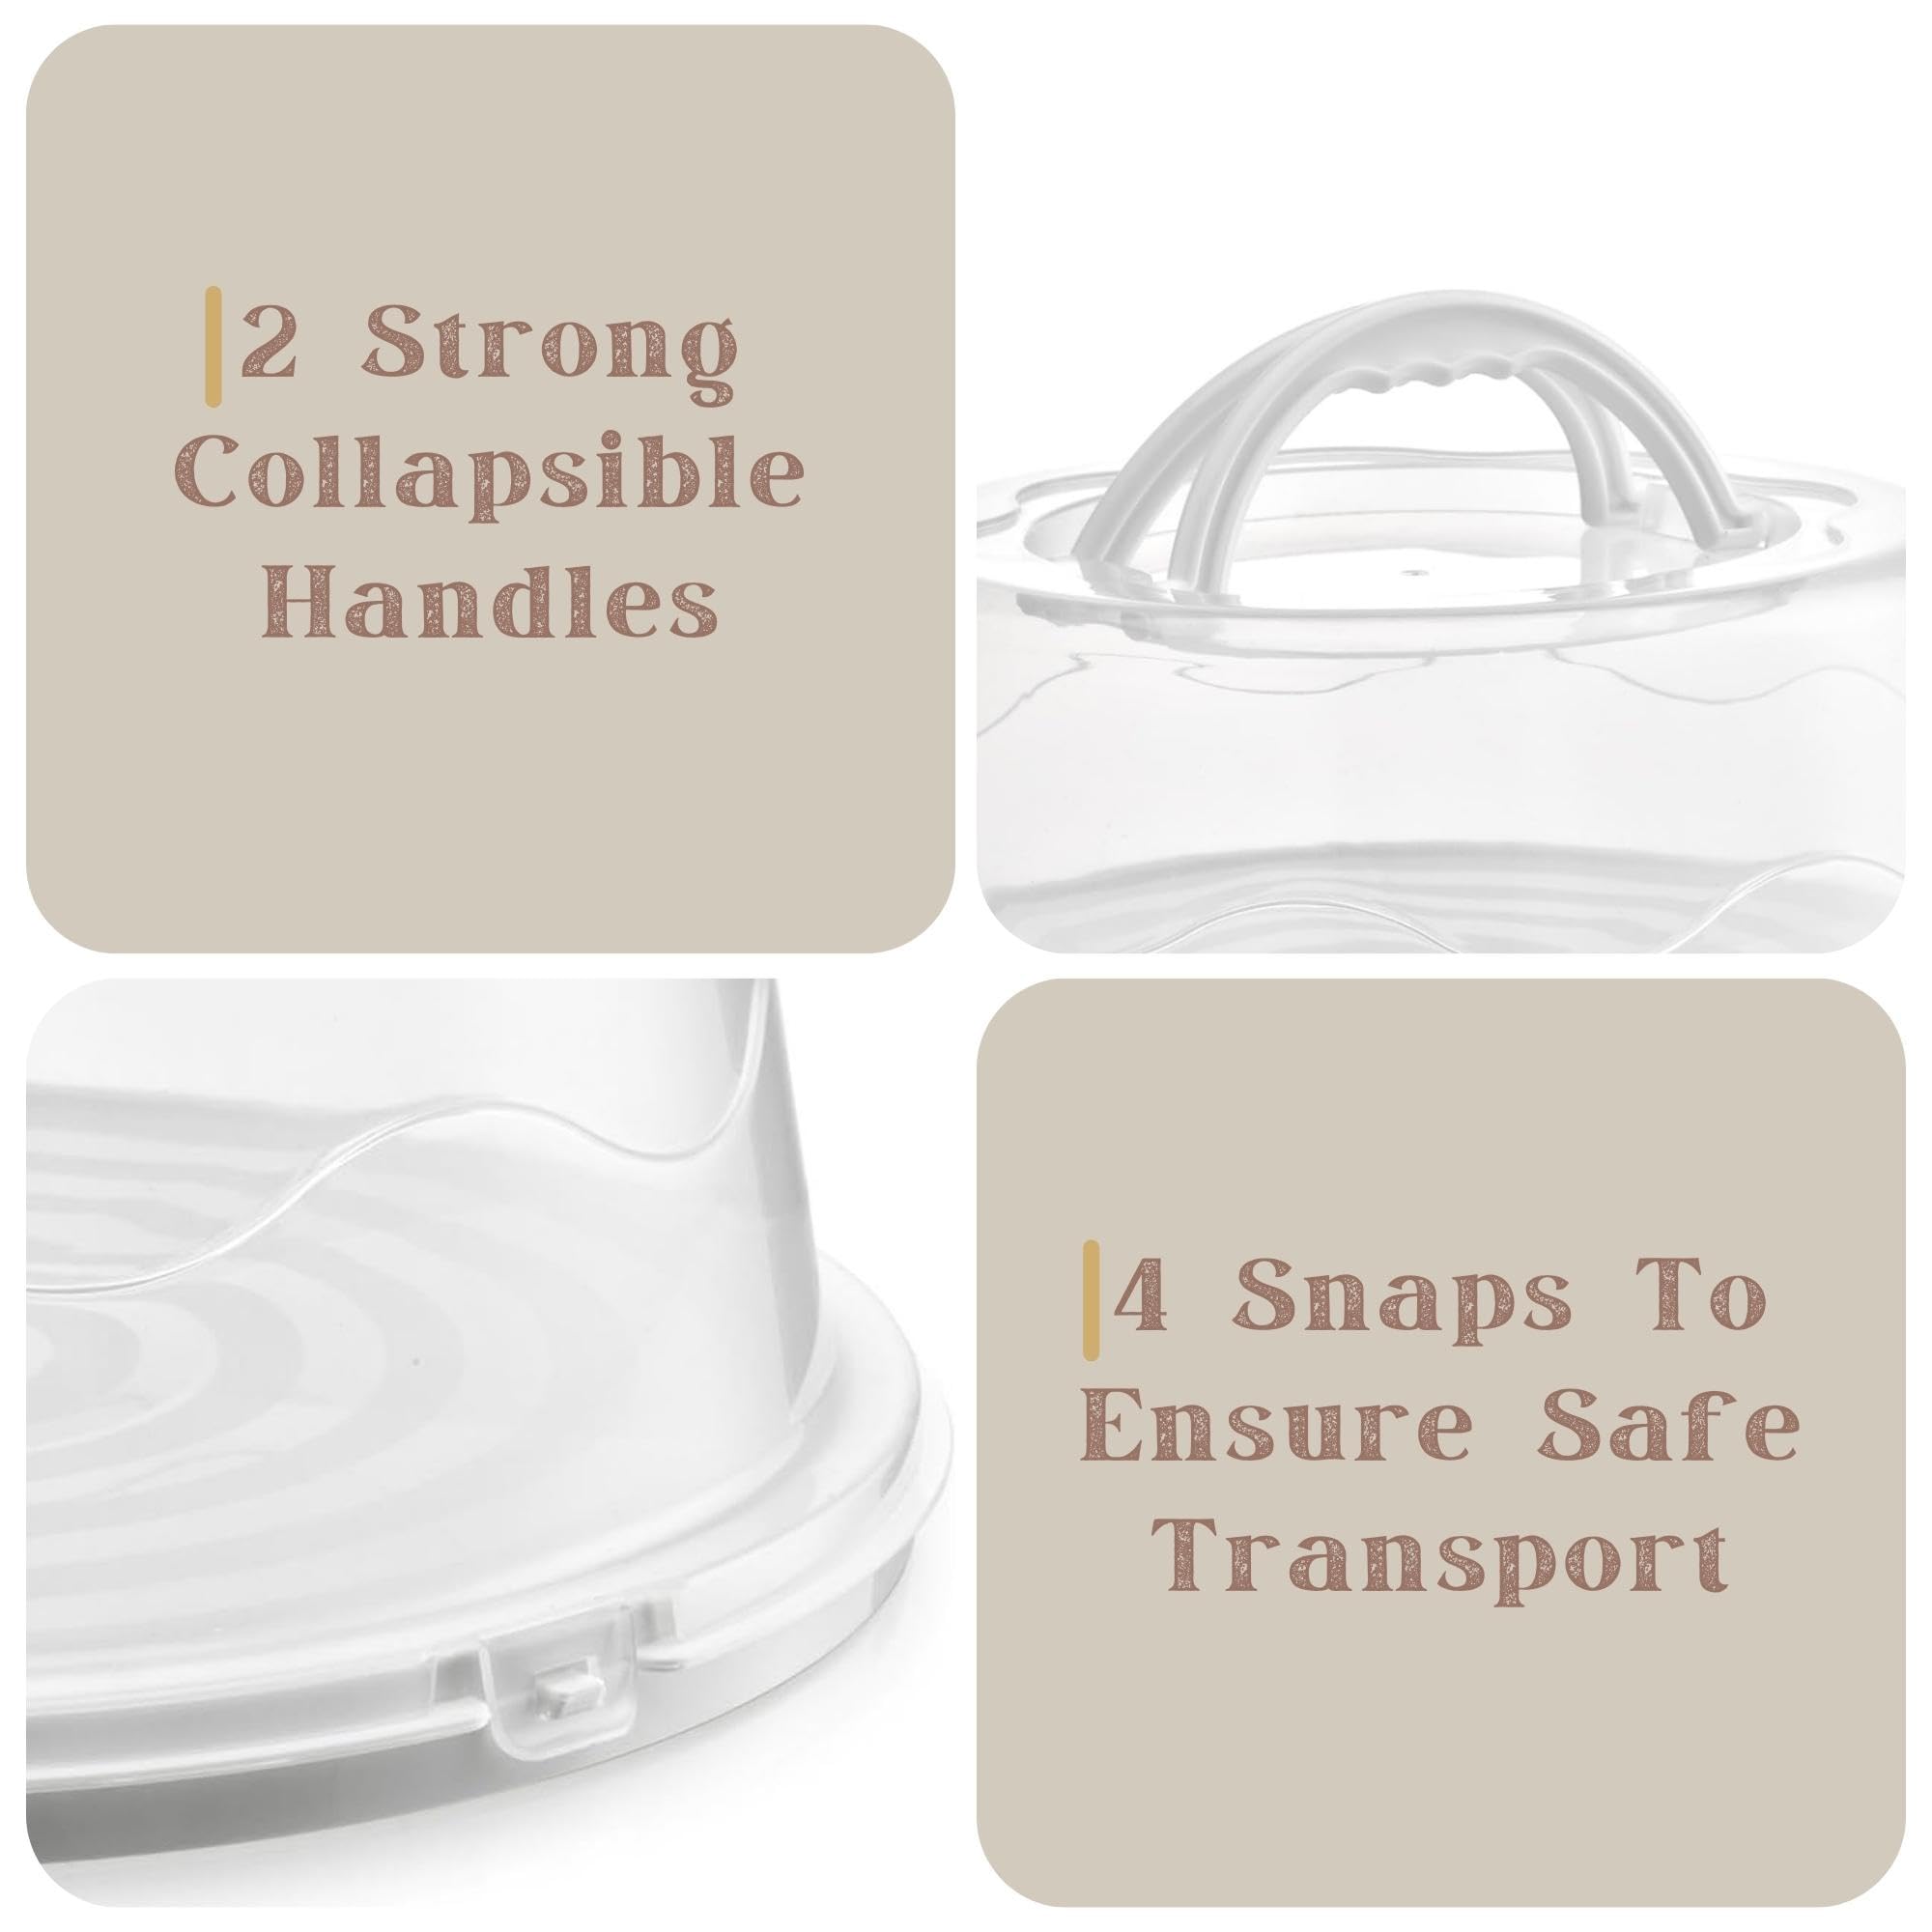 MosJos Round Cake Carrier, BPA-Free Plastic Cake Keeper with Lid, Fits 10� Cakes, Four Secure Side Closures, Dishwasher Safe Cake Transport Container (White)  - Very Good